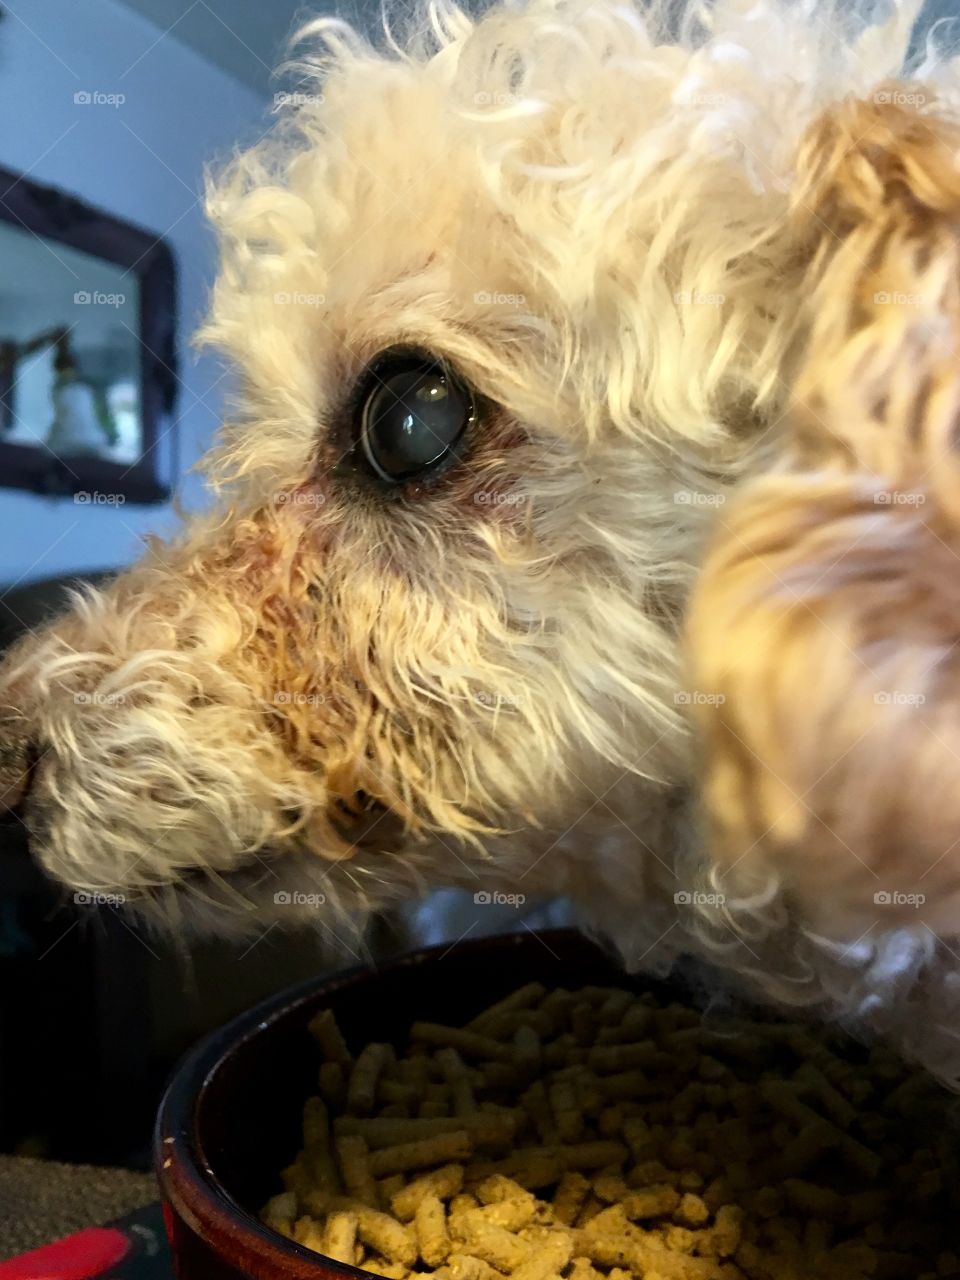 Close Up of Apricot Poodle in Profile

My poodle was eating & then went to that "dark place" he goes too at times from abuse (before we rescued him). I caught him protecting his BilJack dry food from my hubby by staring him down! It's more of a game now with us! 🐾